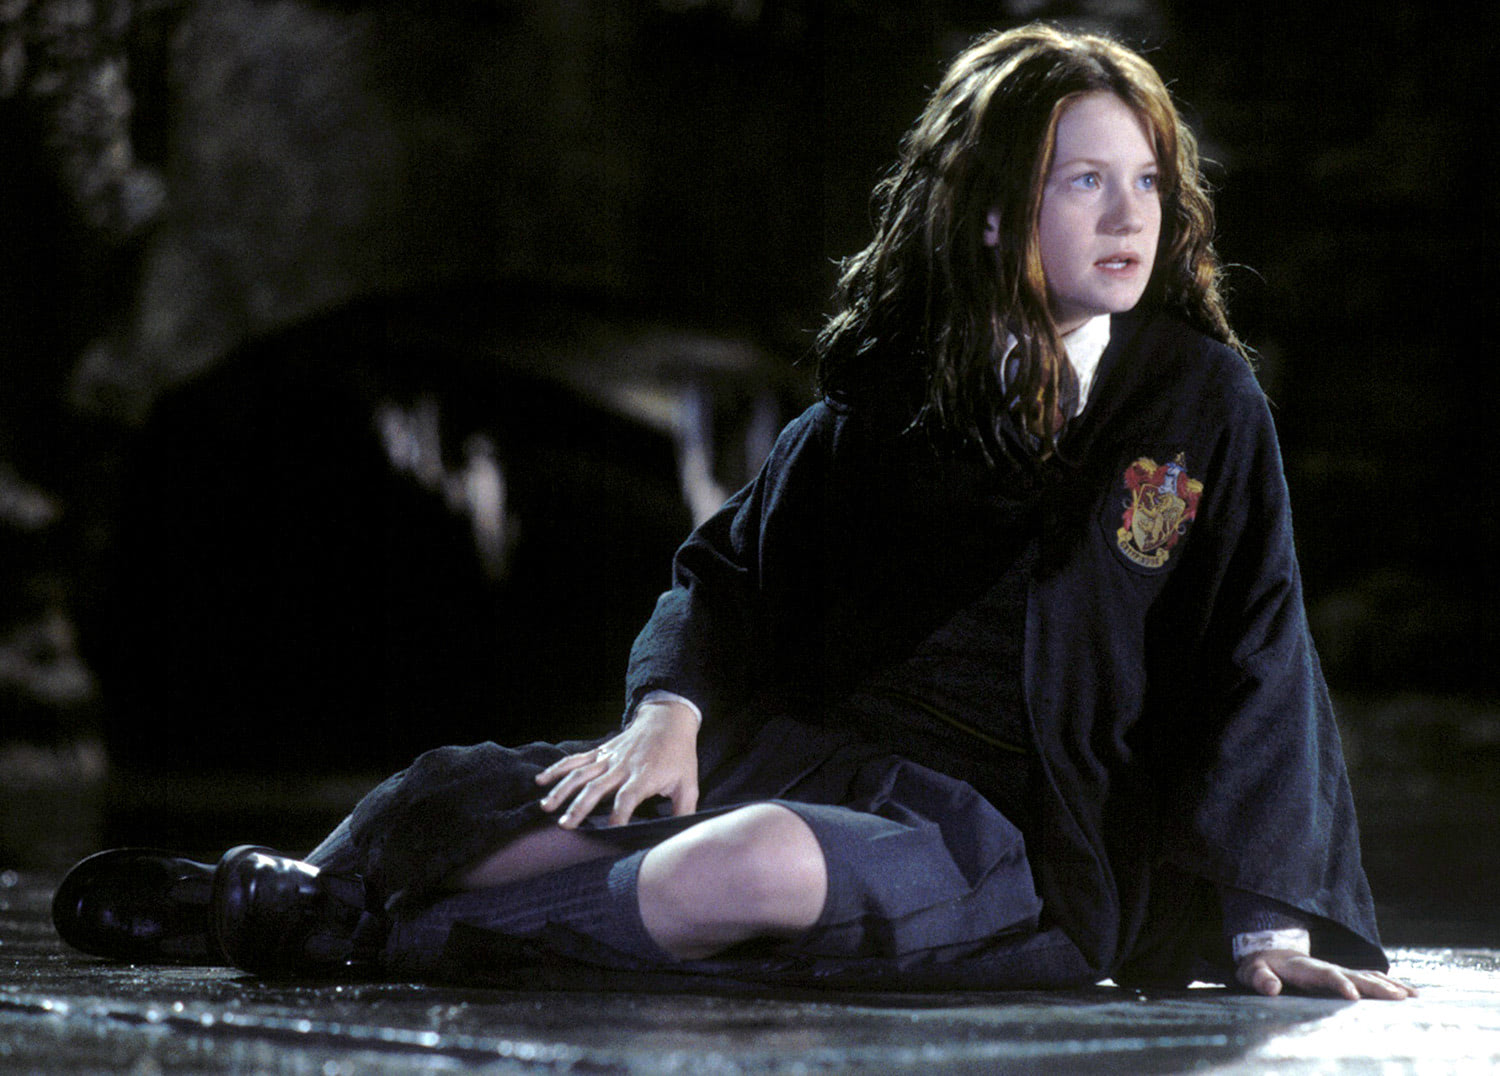 Ginny Weasley in the Chamber of Secrets